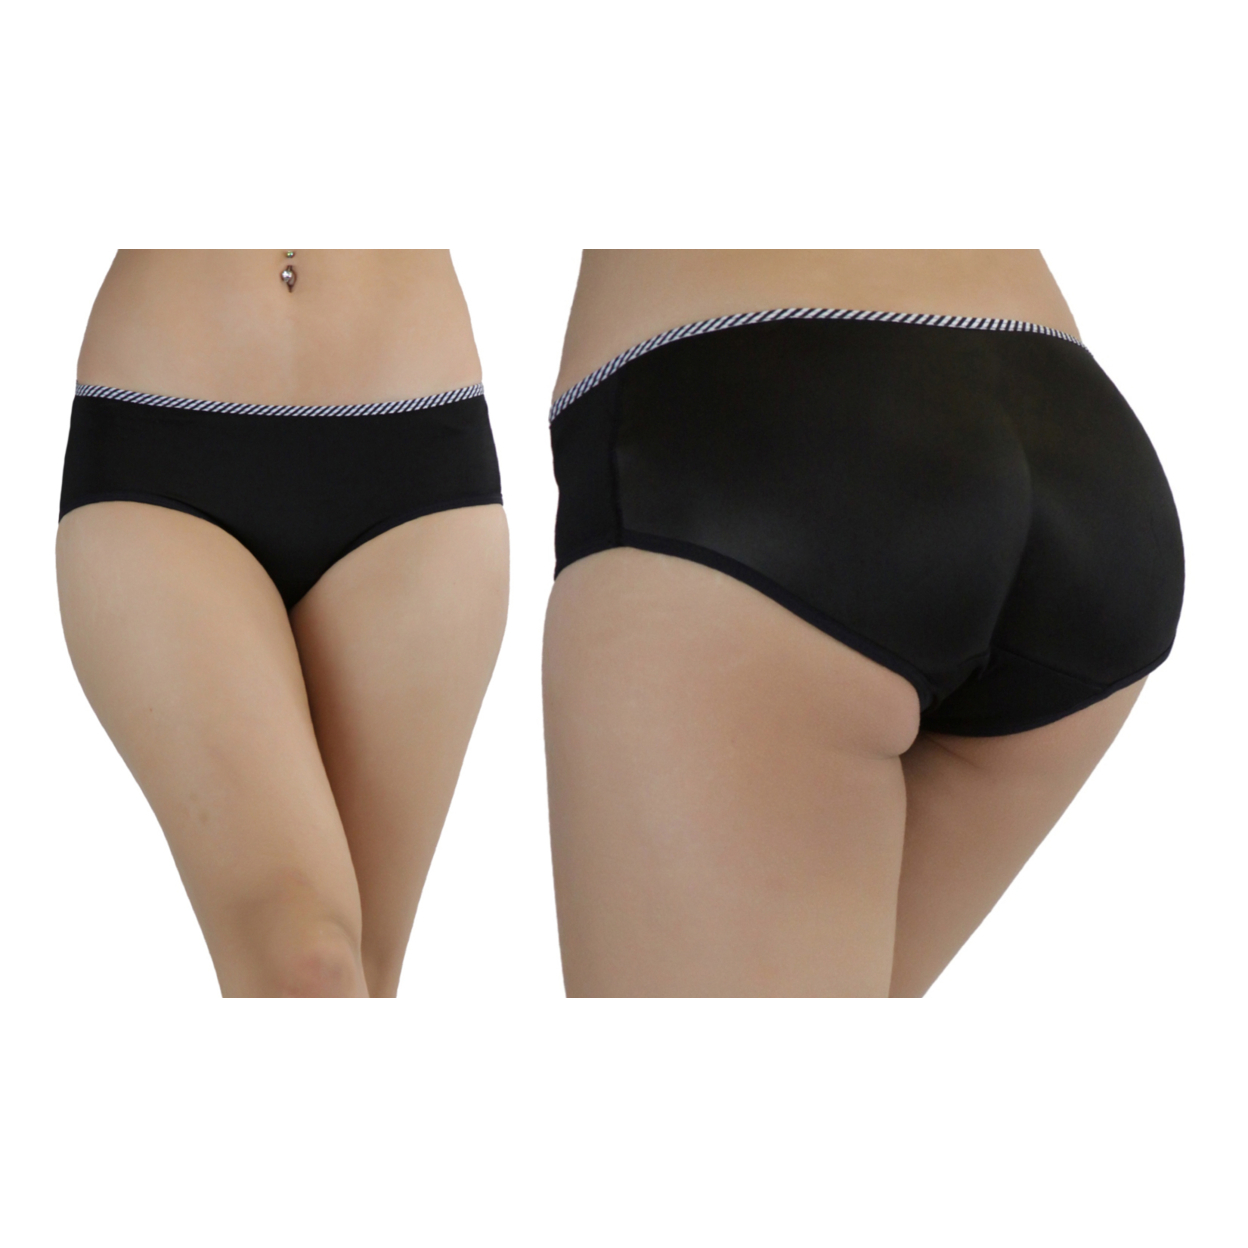 Women's Instant Booty Boosters Padded Panty - Black, M